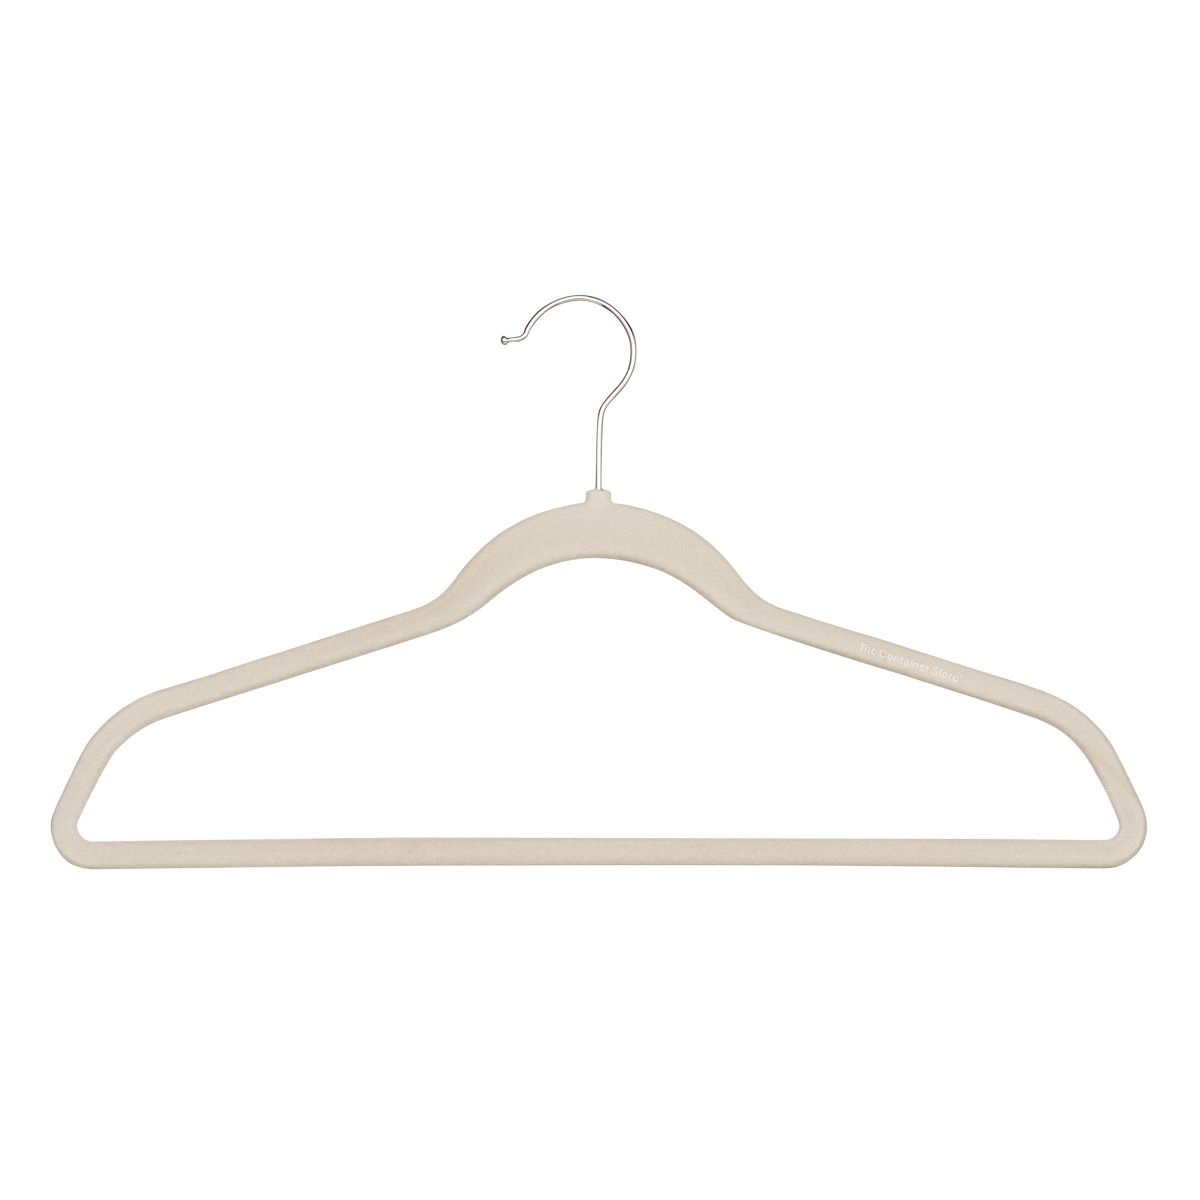 The Container Store Petite Non-Slip Velvet Hangers | The Container Store